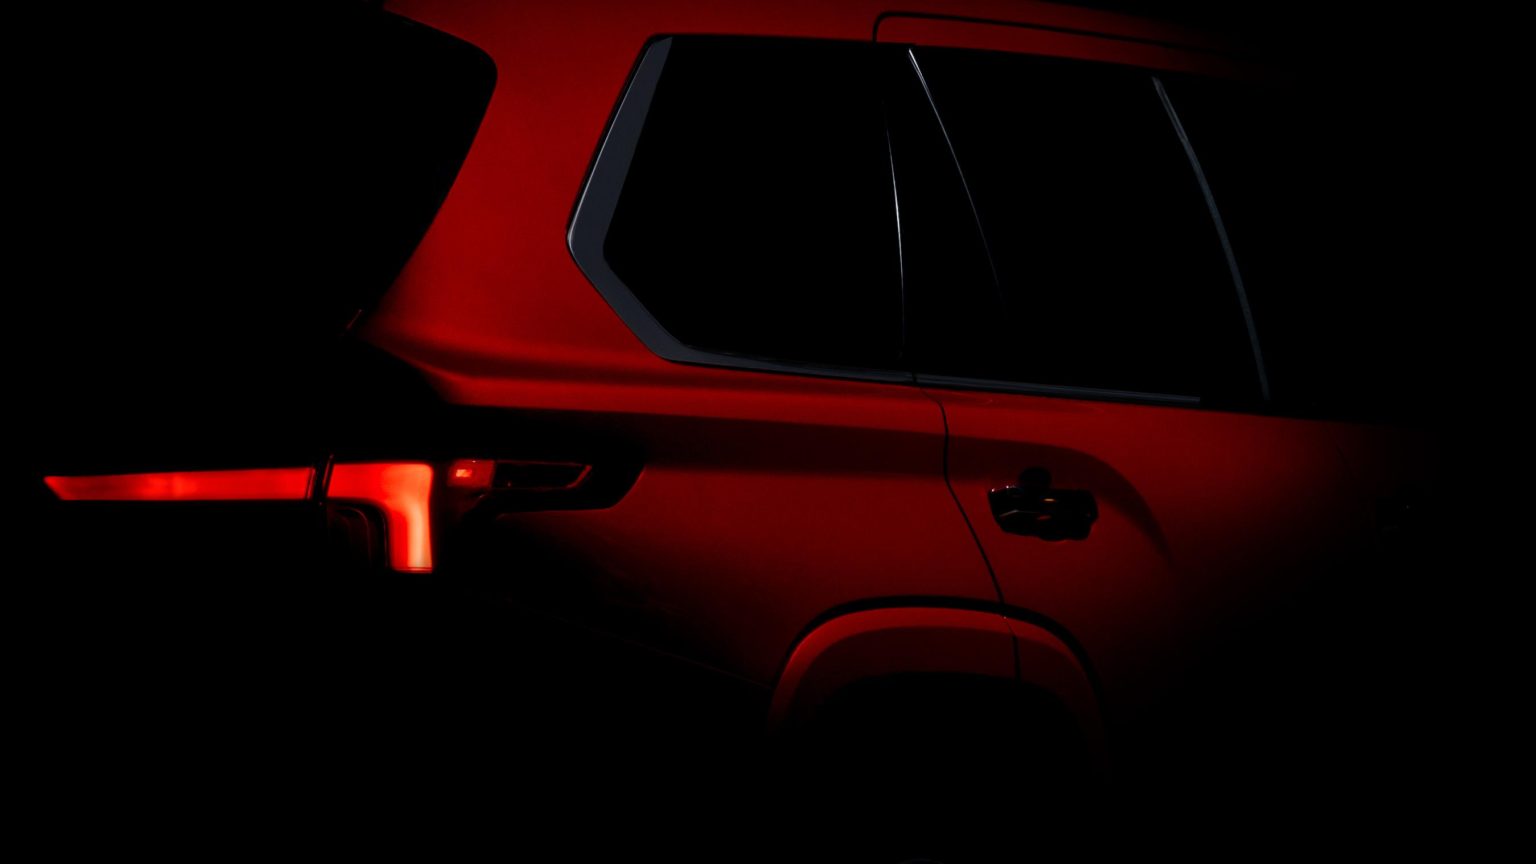 The teaser image gives zero detail on the new SUV.